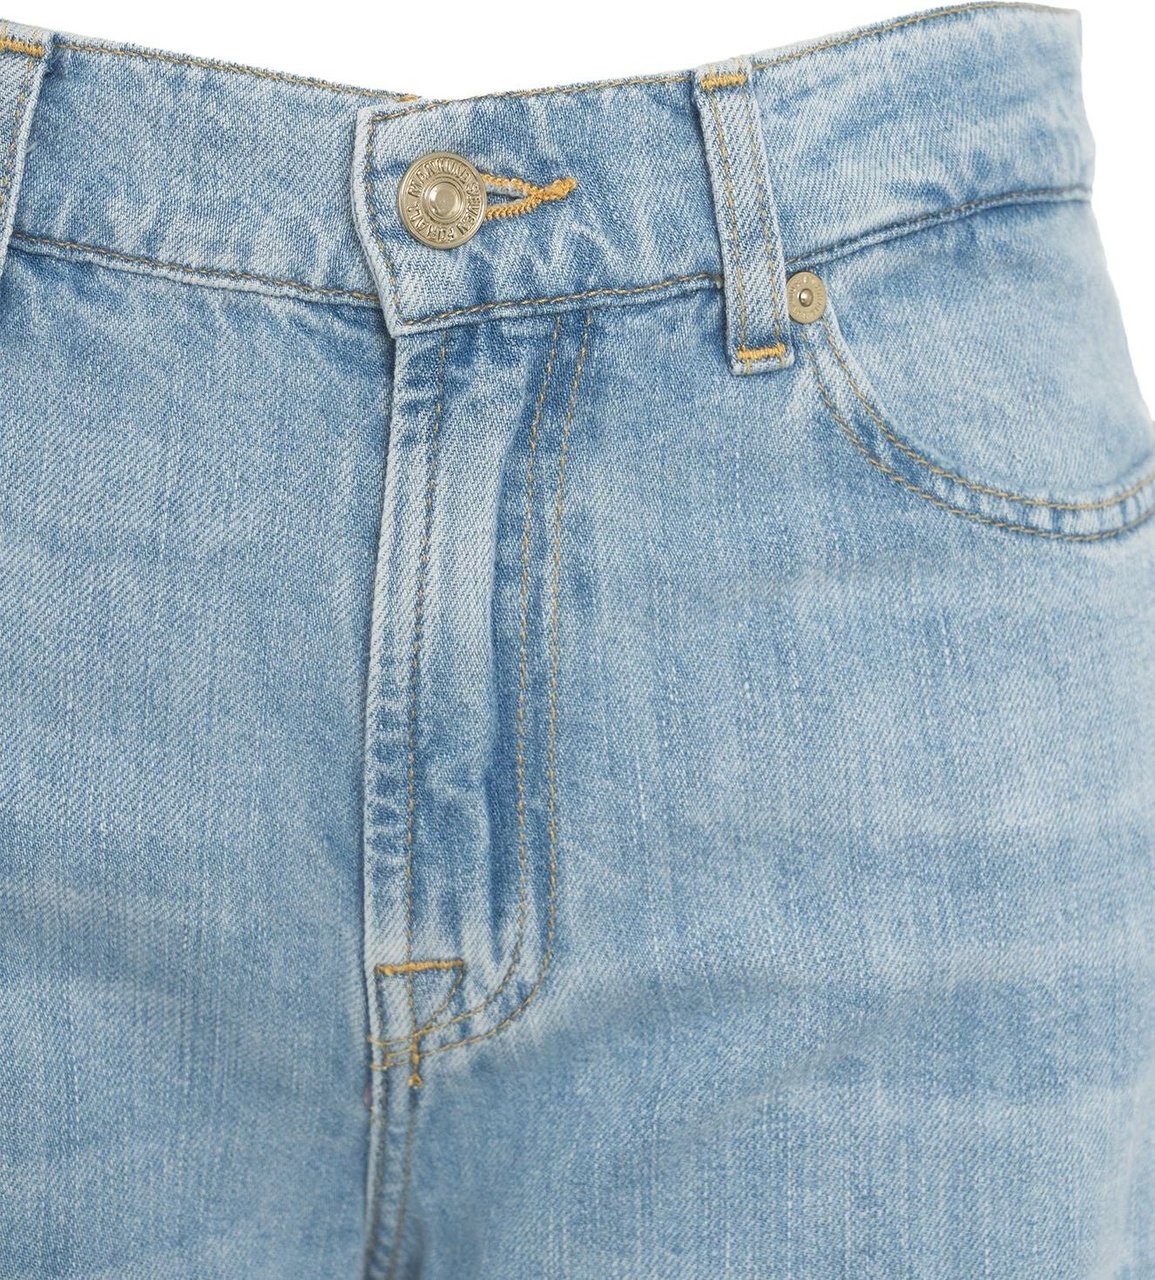 7 For All Mankind Jeans "Lotta" Blauw